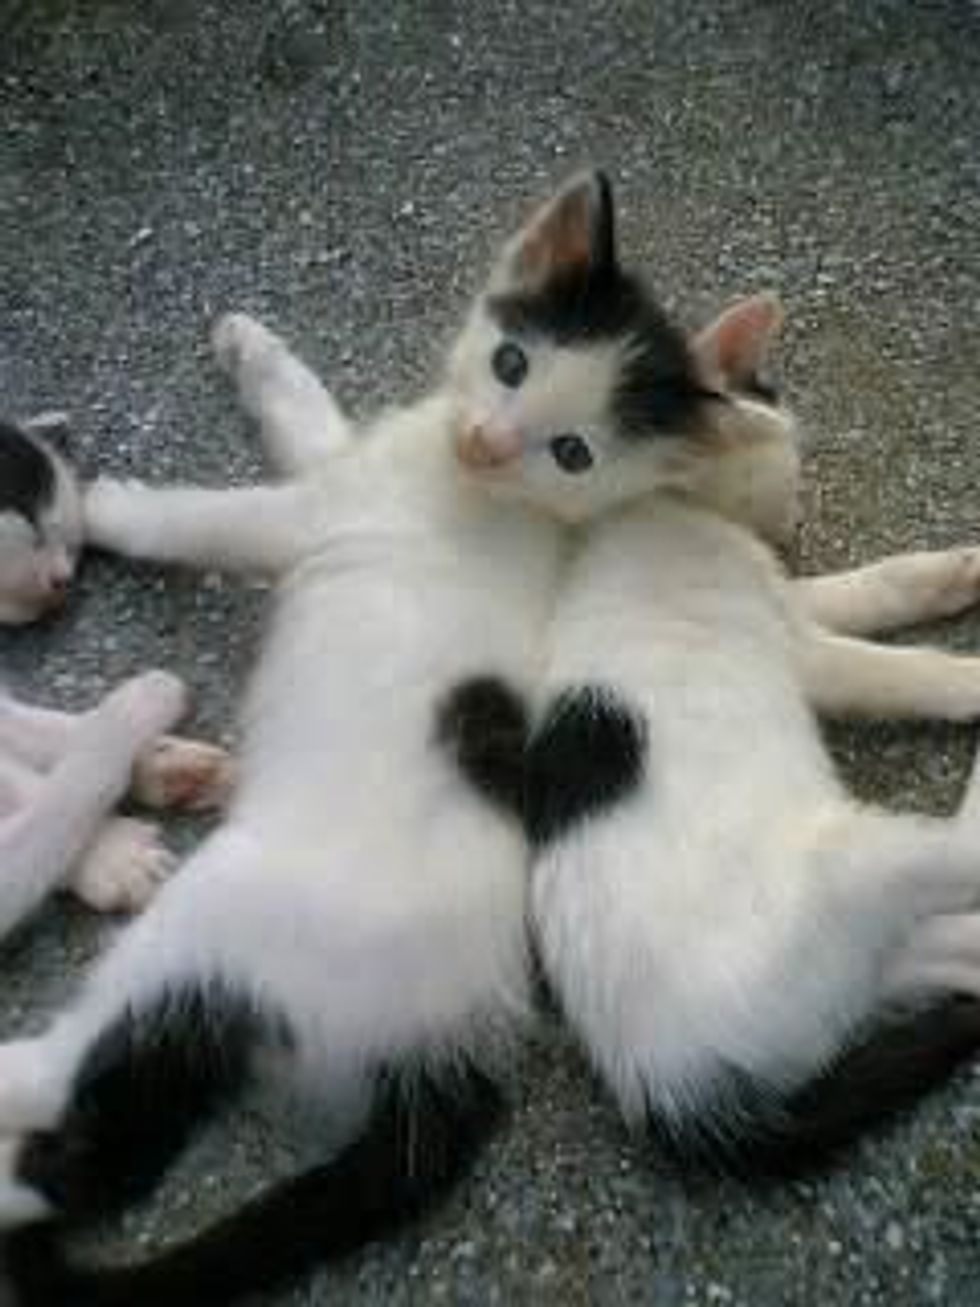 Valentines Kittens with Heart Shaped Markings